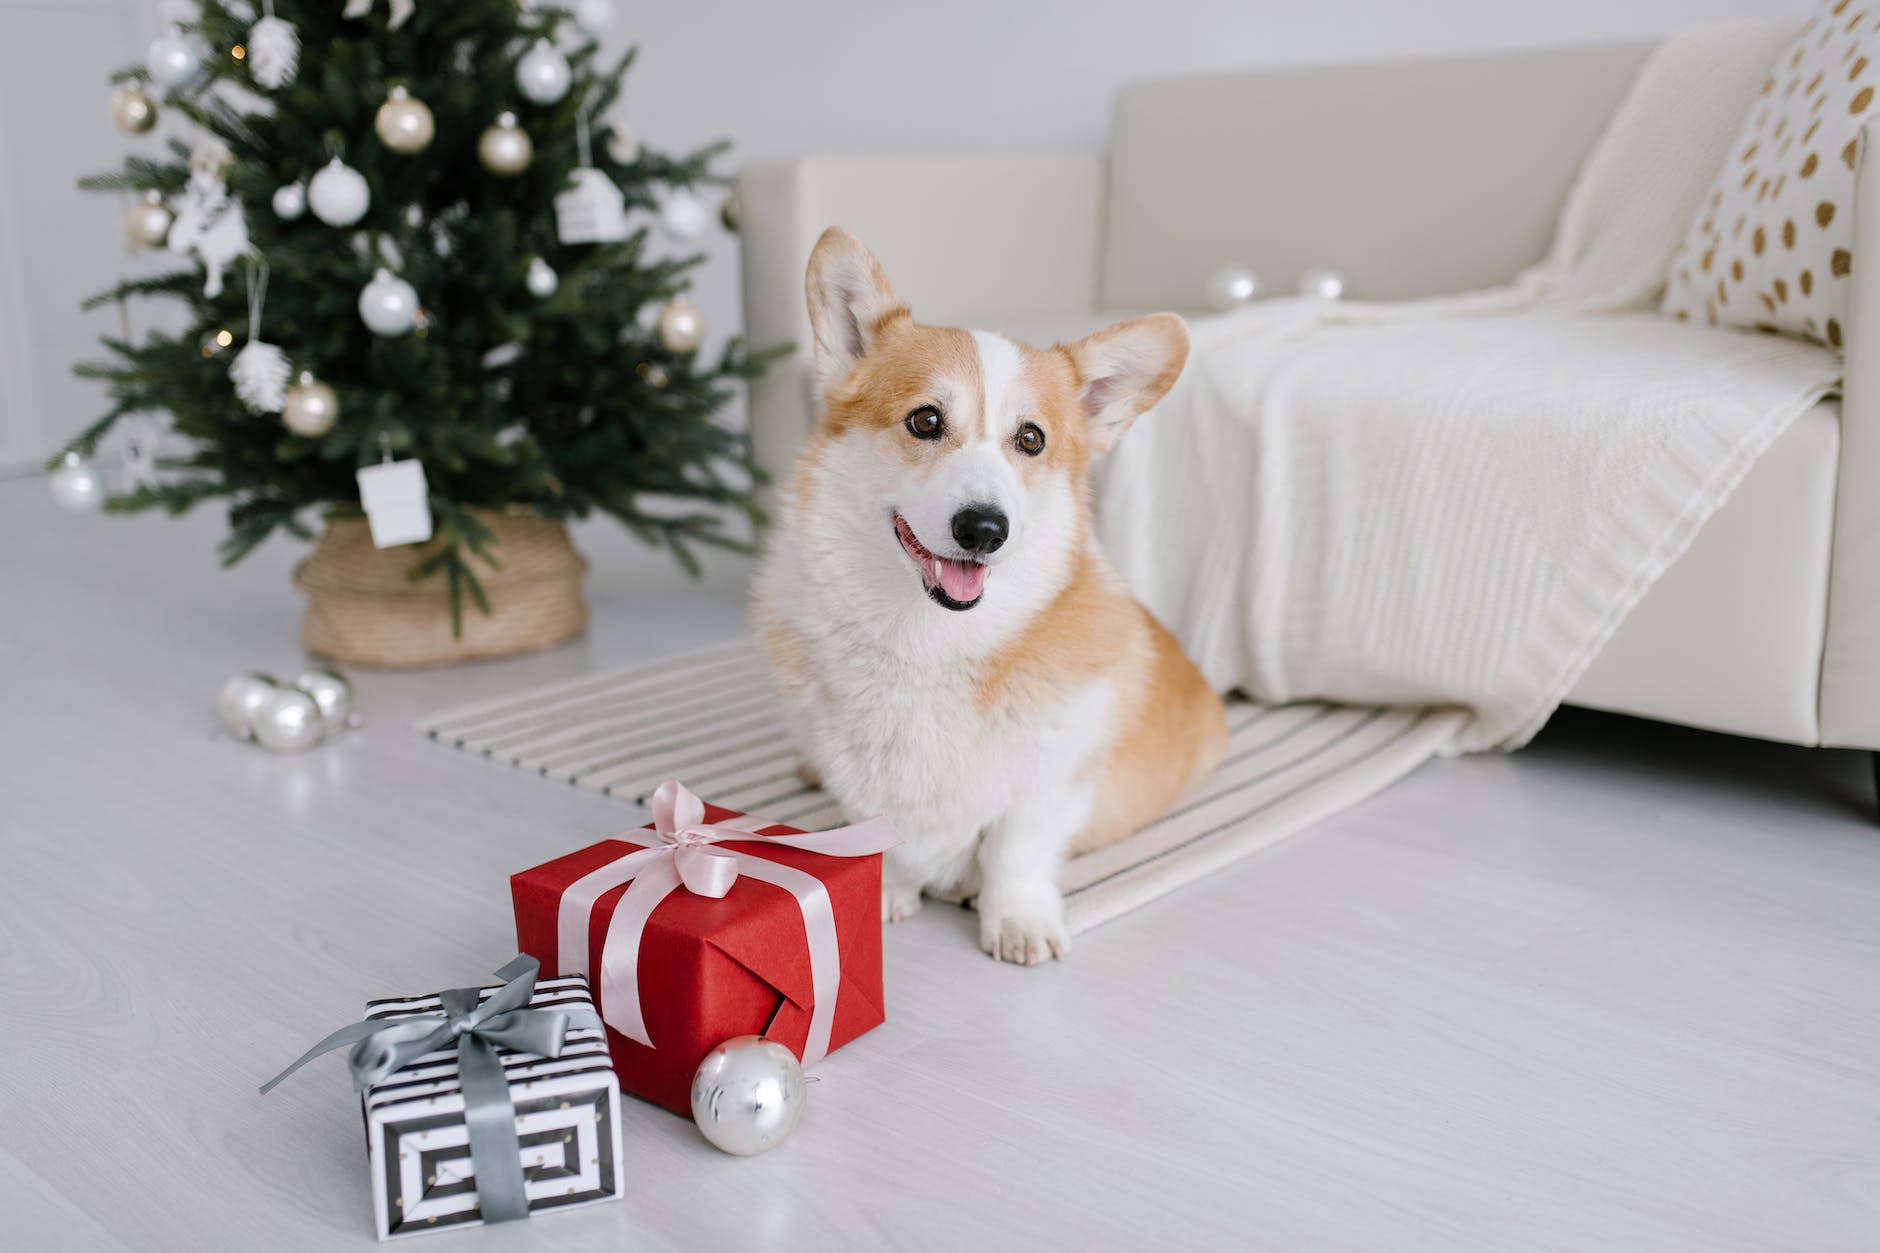 Top Handmade Pet Christmas Gifts: Holiday Treats and Fashion They’ll Love